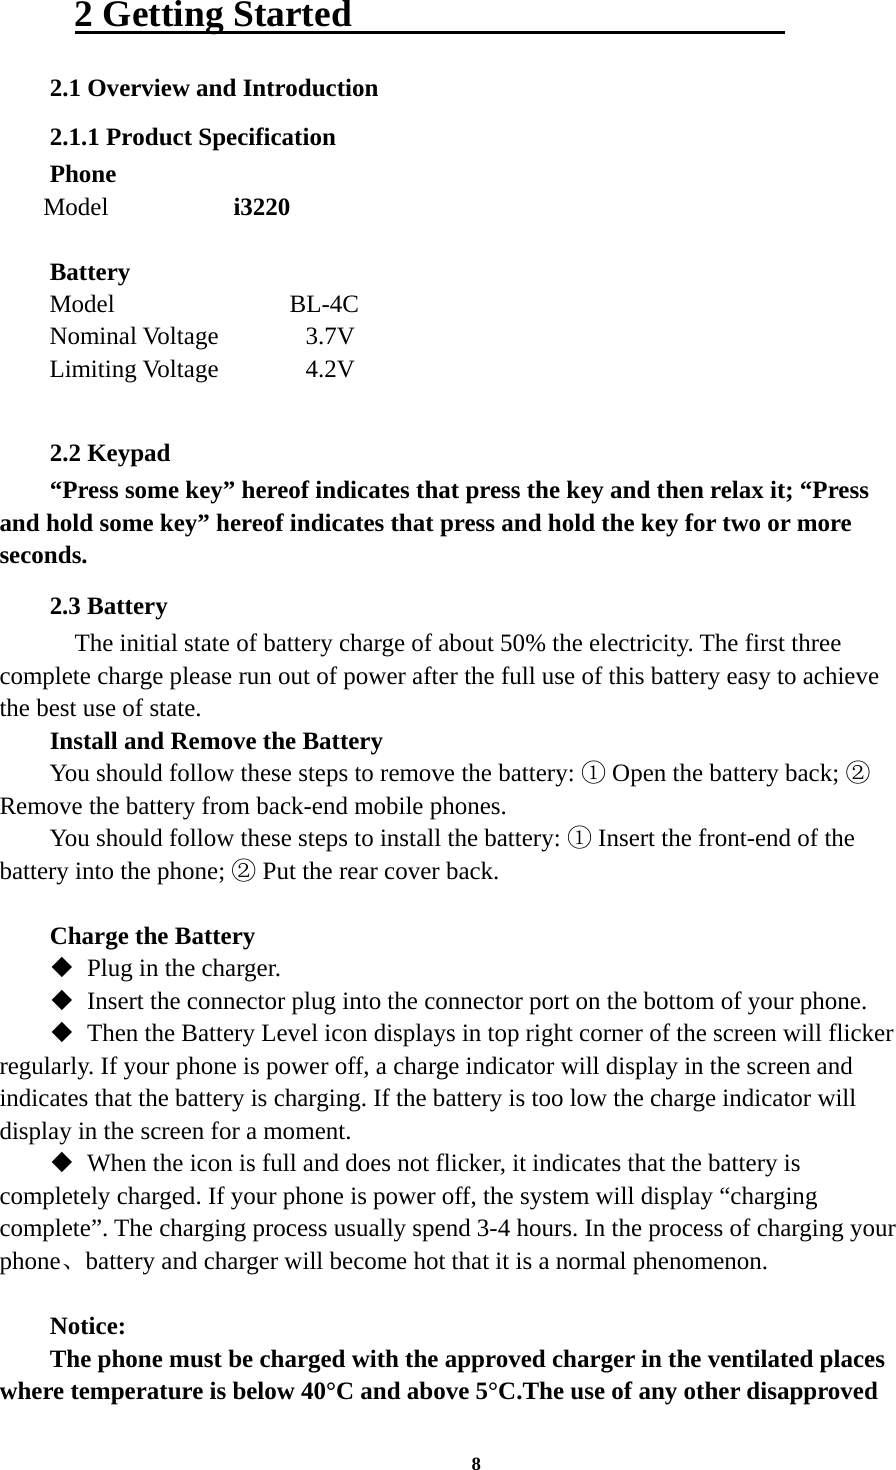 8 2 Getting Started                        2.1 Overview and Introduction 2.1.1 Product Specification Phone Model          i3220      Battery Model              BL-4C Nominal Voltage      3.7V Limiting Voltage    4.2V     2.2 Keypad “Press some key” hereof indicates that press the key and then relax it; “Press and hold some key” hereof indicates that press and hold the key for two or more seconds. 2.3 Battery     The initial state of battery charge of about 50% the electricity. The first three complete charge please run out of power after the full use of this battery easy to achieve the best use of state. Install and Remove the Battery You should follow these steps to remove the battery:   Open the battery back;   ①②Remove the battery from back-end mobile phones. You should follow these steps to install the battery:   Insert the front①-end of the battery into the phone;   Put the rear cover back.②  Charge the Battery  Plug in the charger.  Insert the connector plug into the connector port on the bottom of your phone.    Then the Battery Level icon displays in top right corner of the screen will flicker regularly. If your phone is power off, a charge indicator will display in the screen and indicates that the battery is charging. If the battery is too low the charge indicator will display in the screen for a moment.  When the icon is full and does not flicker, it indicates that the battery is completely charged. If your phone is power off, the system will display “charging complete”. The charging process usually spend 3-4 hours. In the process of charging your phone、battery and charger will become hot that it is a normal phenomenon.  Notice: The phone must be charged with the approved charger in the ventilated places where temperature is below 40°C and above 5°C.The use of any other disapproved 